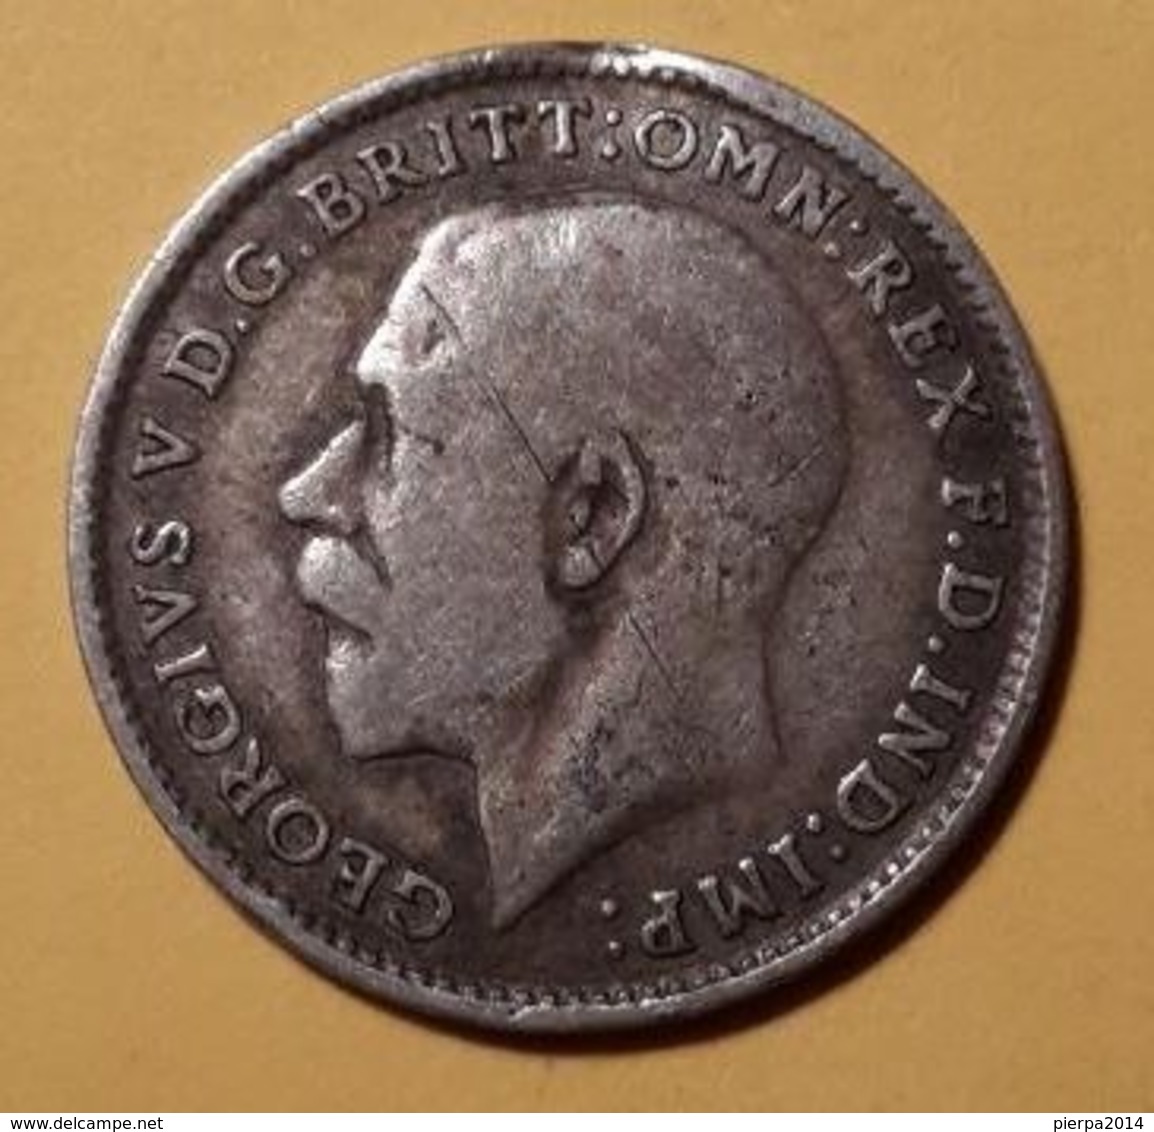 Great Britain 3 Pence - F. 3 Pence